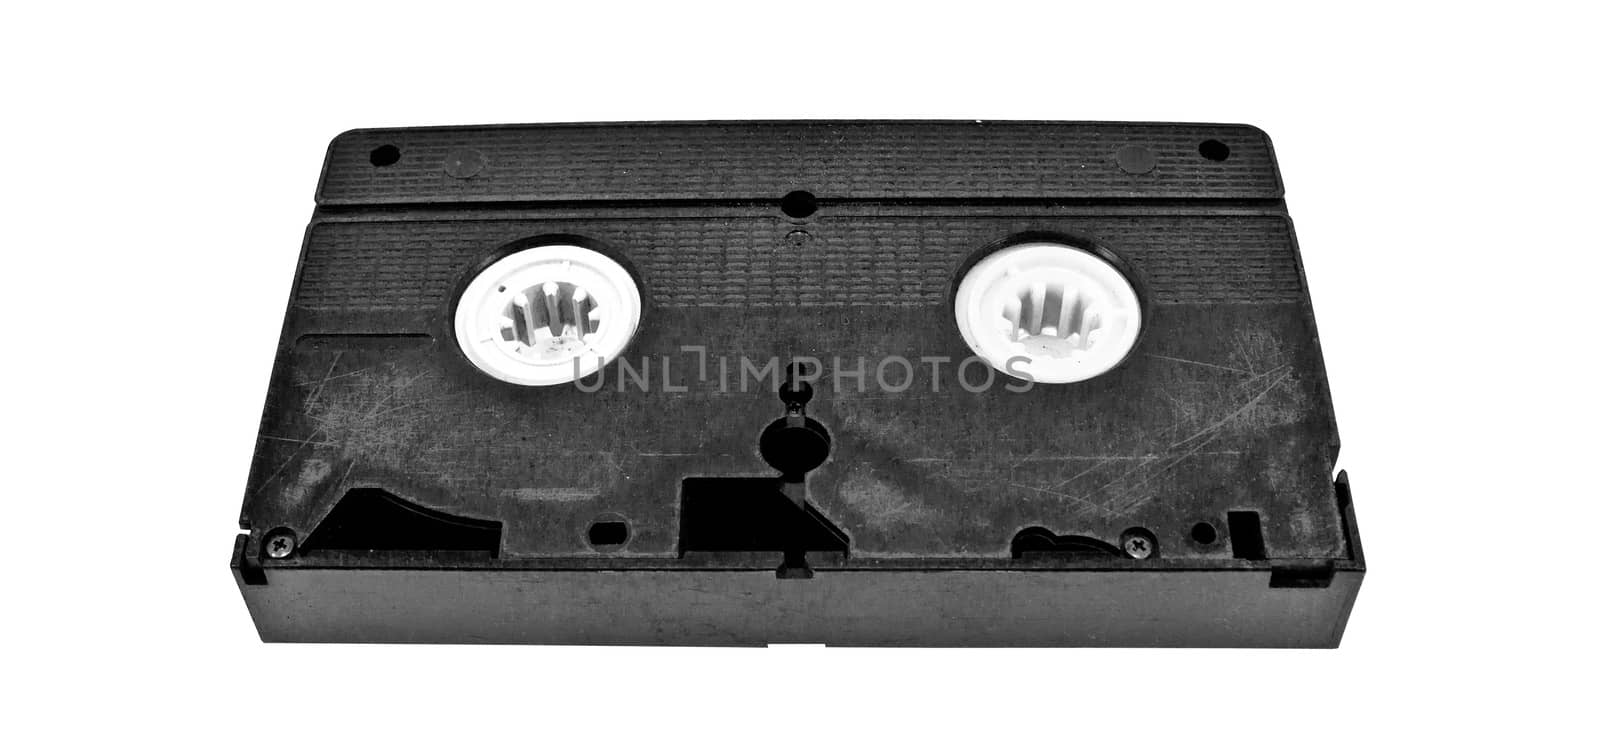 Old video cassette standard isolated on white background by sutipp11